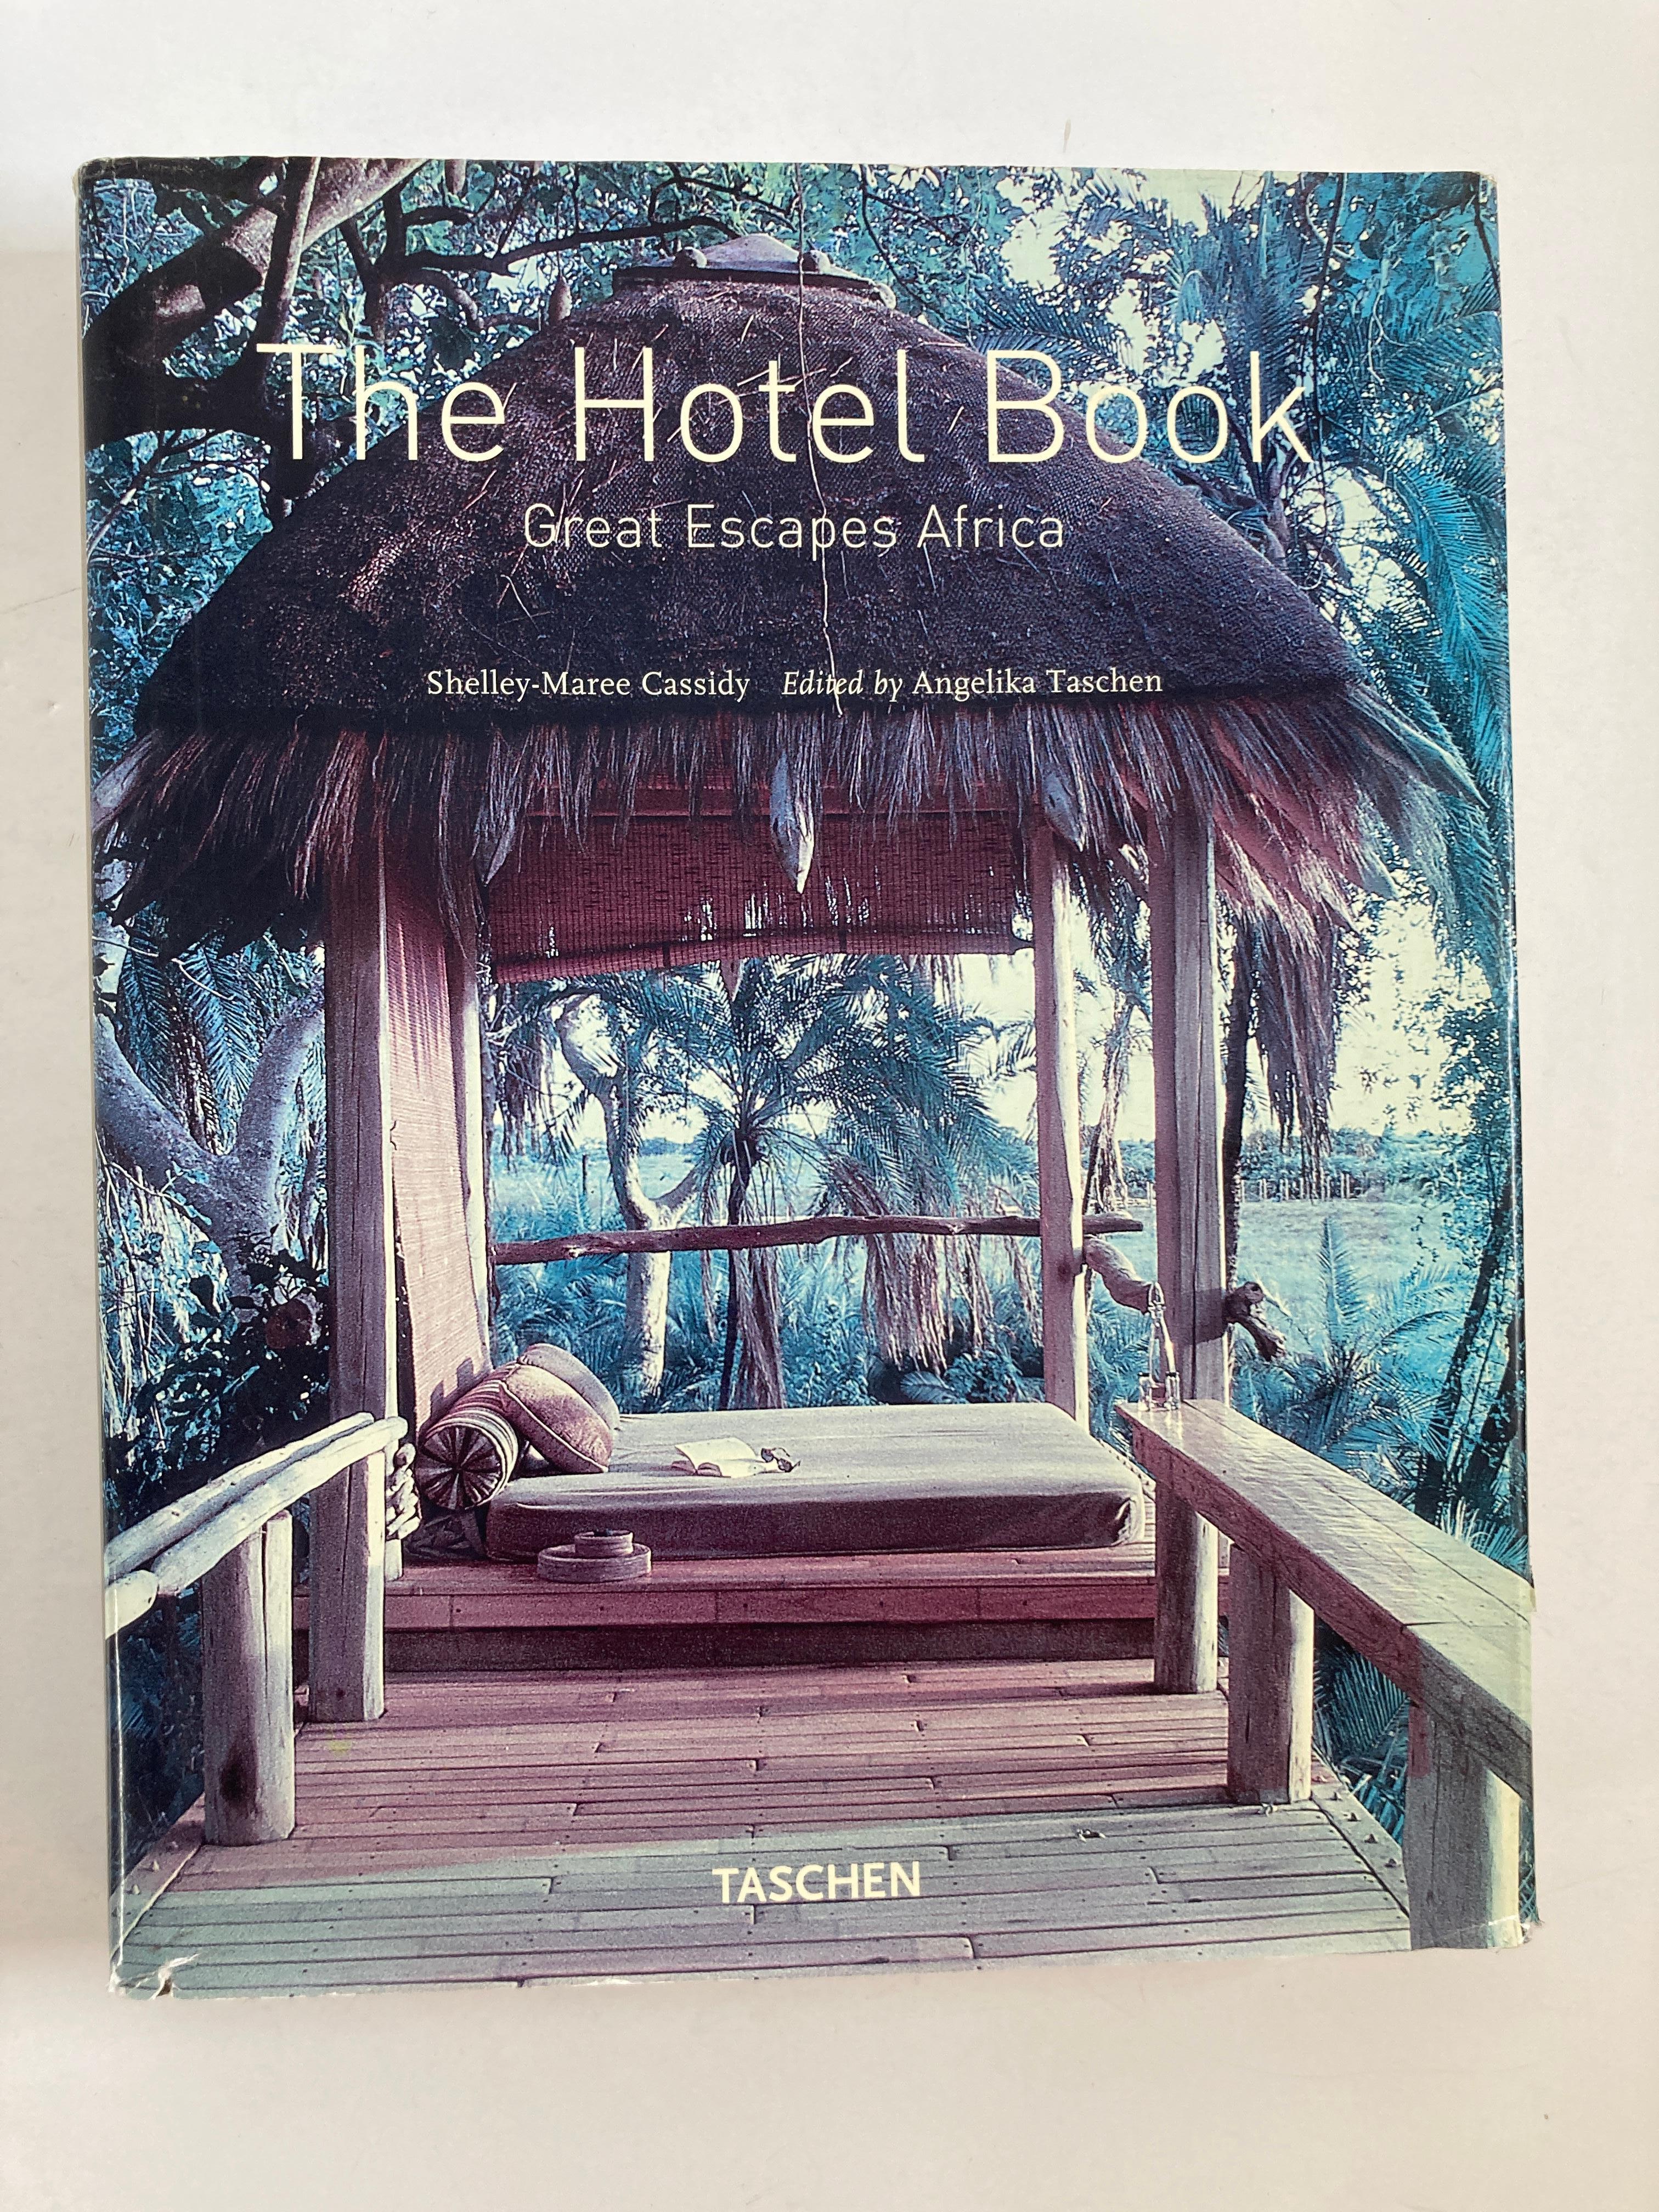 The Hotel Book
Book by Shelley-Maree Cassidy.
From the Mediterranean Sea to the Indian Ocean, the vast Sahara to the Cape Verde archipelago, Africa offers a lifetime of travel adventures. Whether you’re a wide-eyed newcomer or an ever-returning